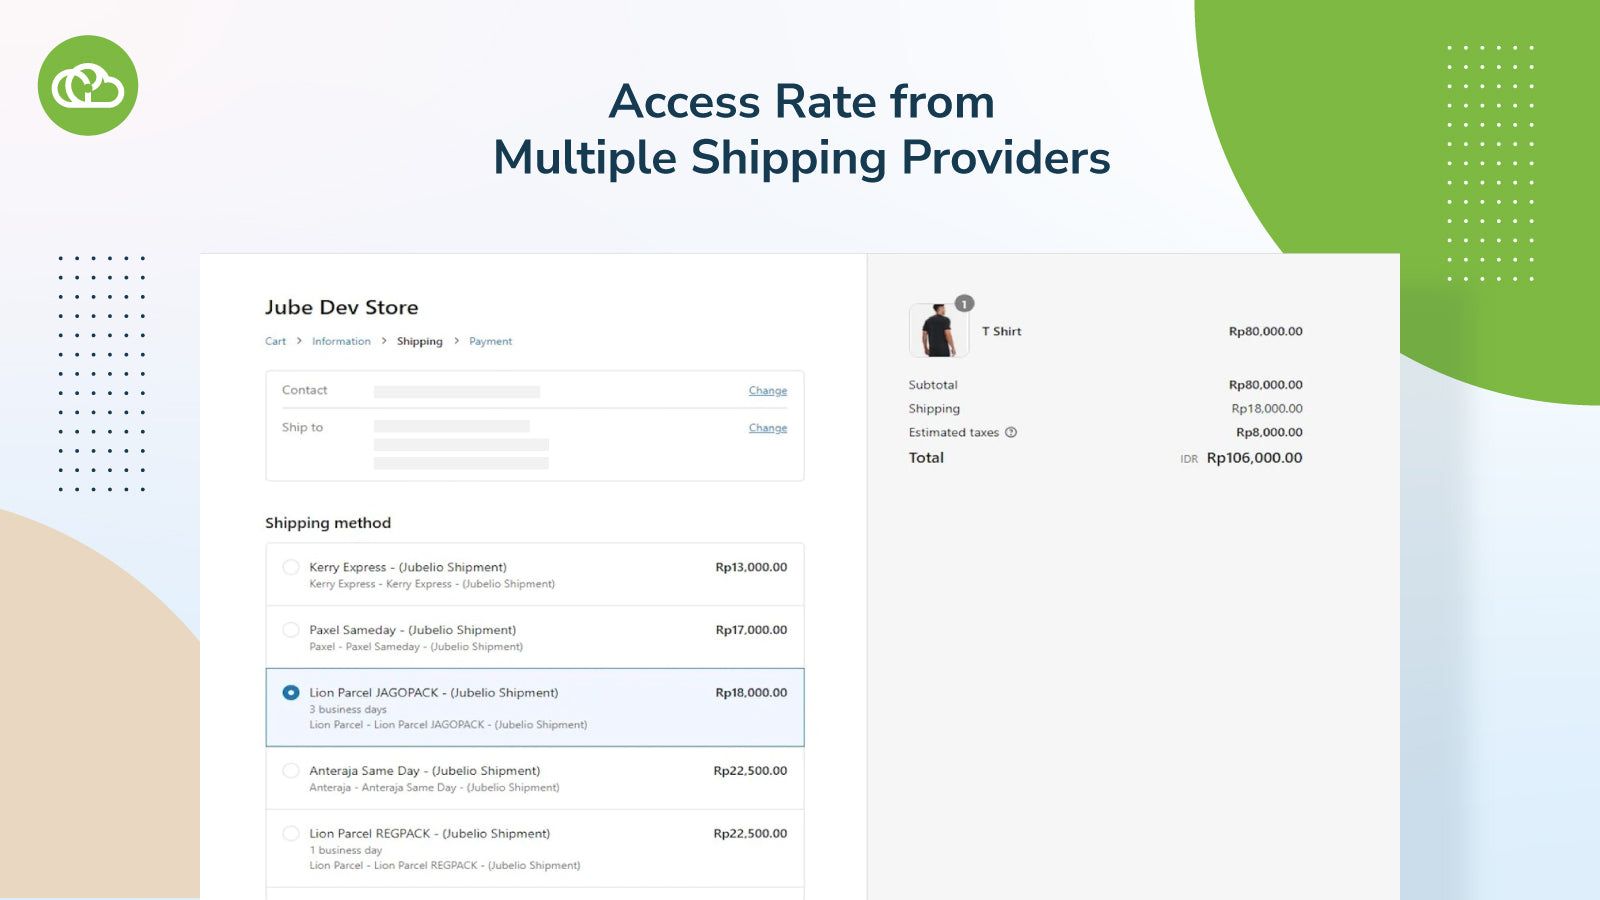 Access rates from multiple shipping providers